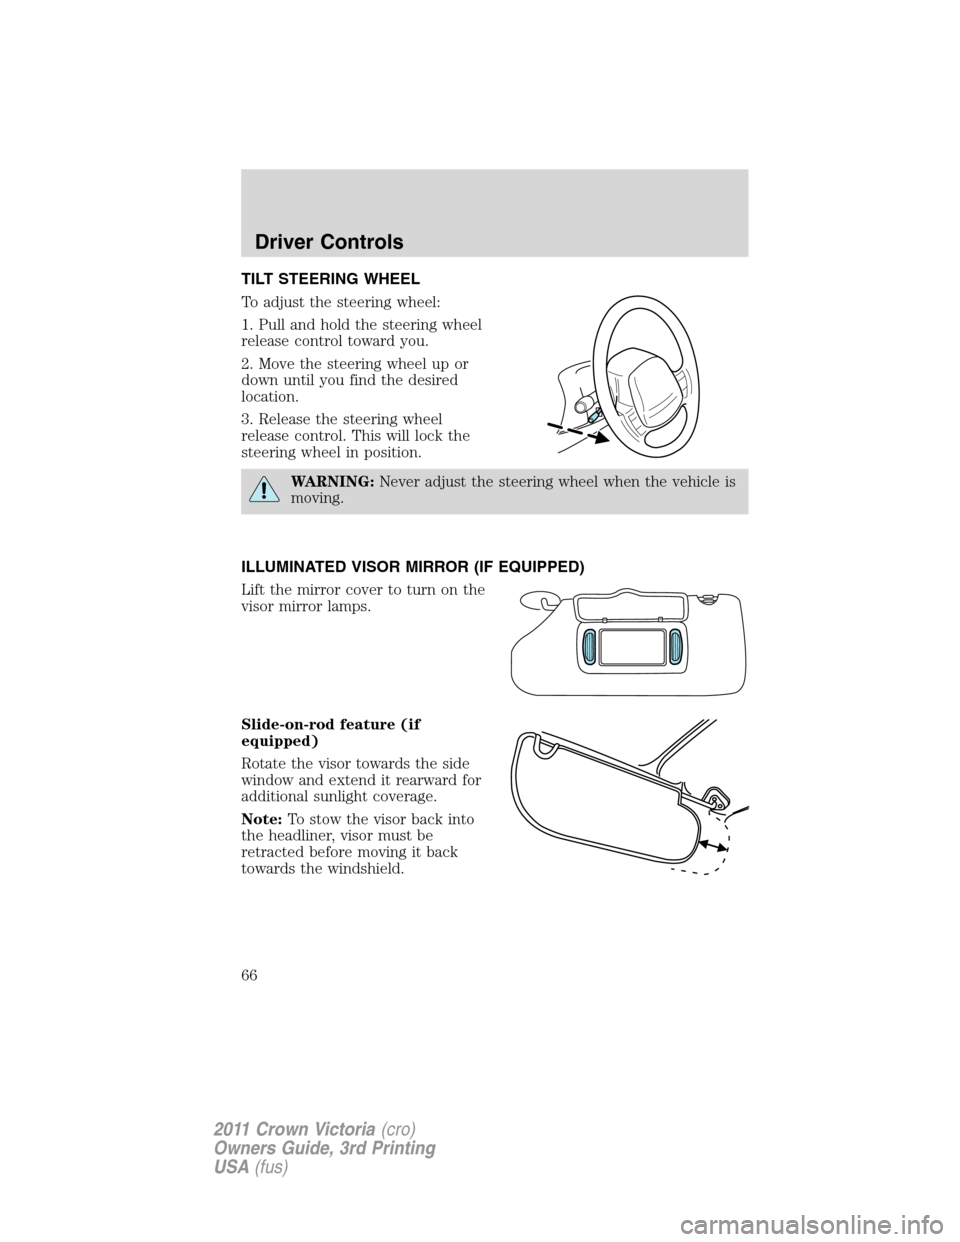 FORD CROWN VICTORIA 2011 2.G Owners Manual TILT STEERING WHEEL
To adjust the steering wheel:
1. Pull and hold the steering wheel
release control toward you.
2. Move the steering wheel up or
down until you find the desired
location.
3. Release 